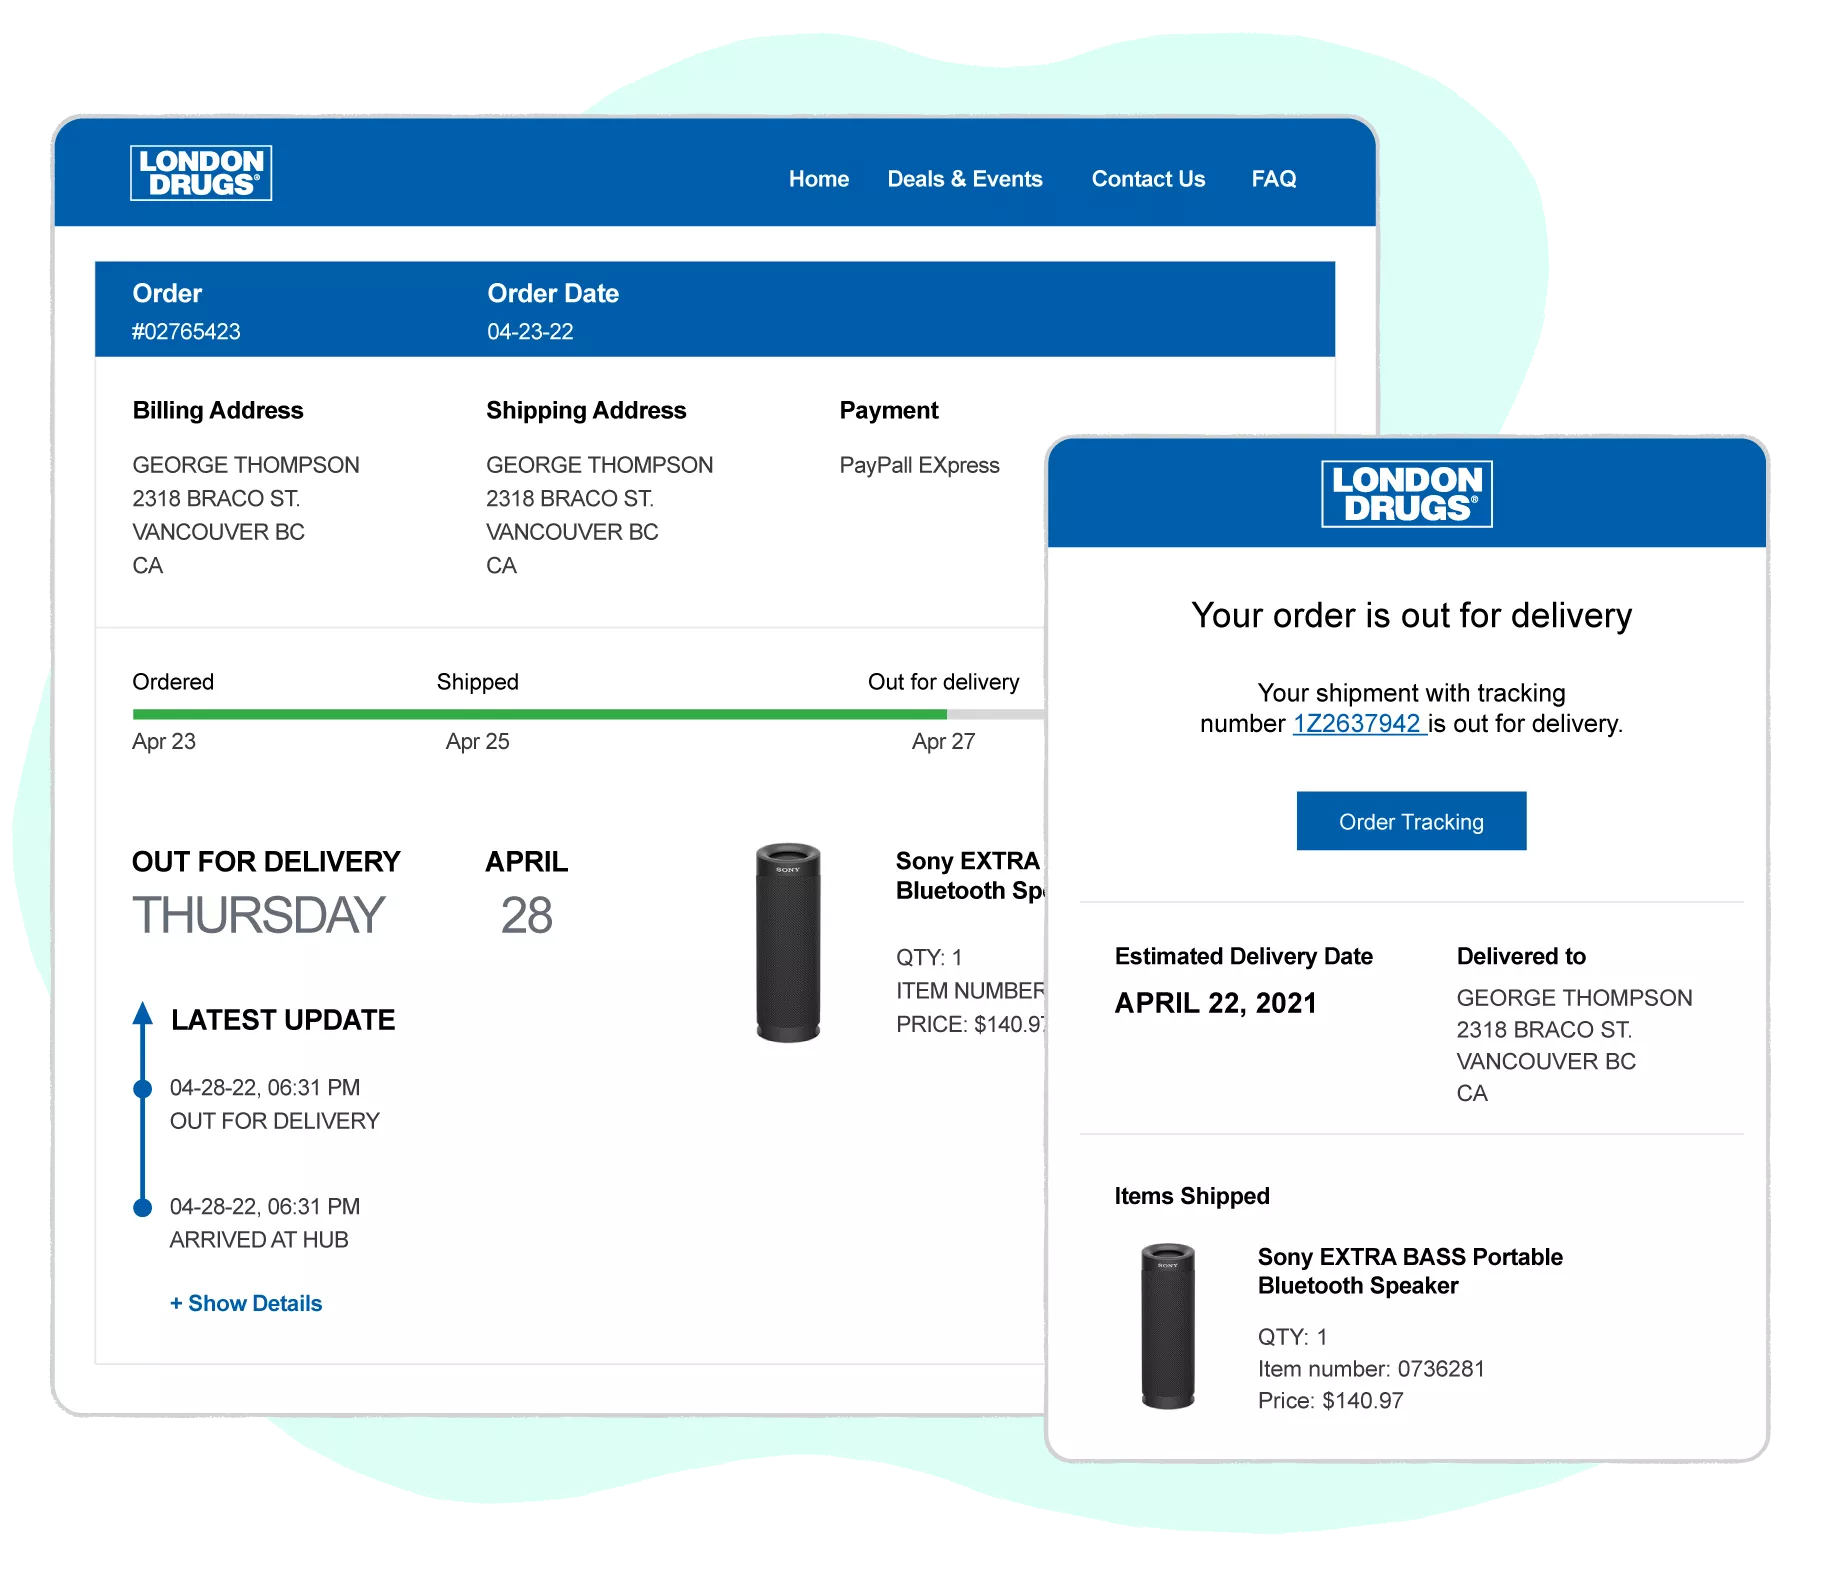 WeSupply order tracking page and proactive notifications